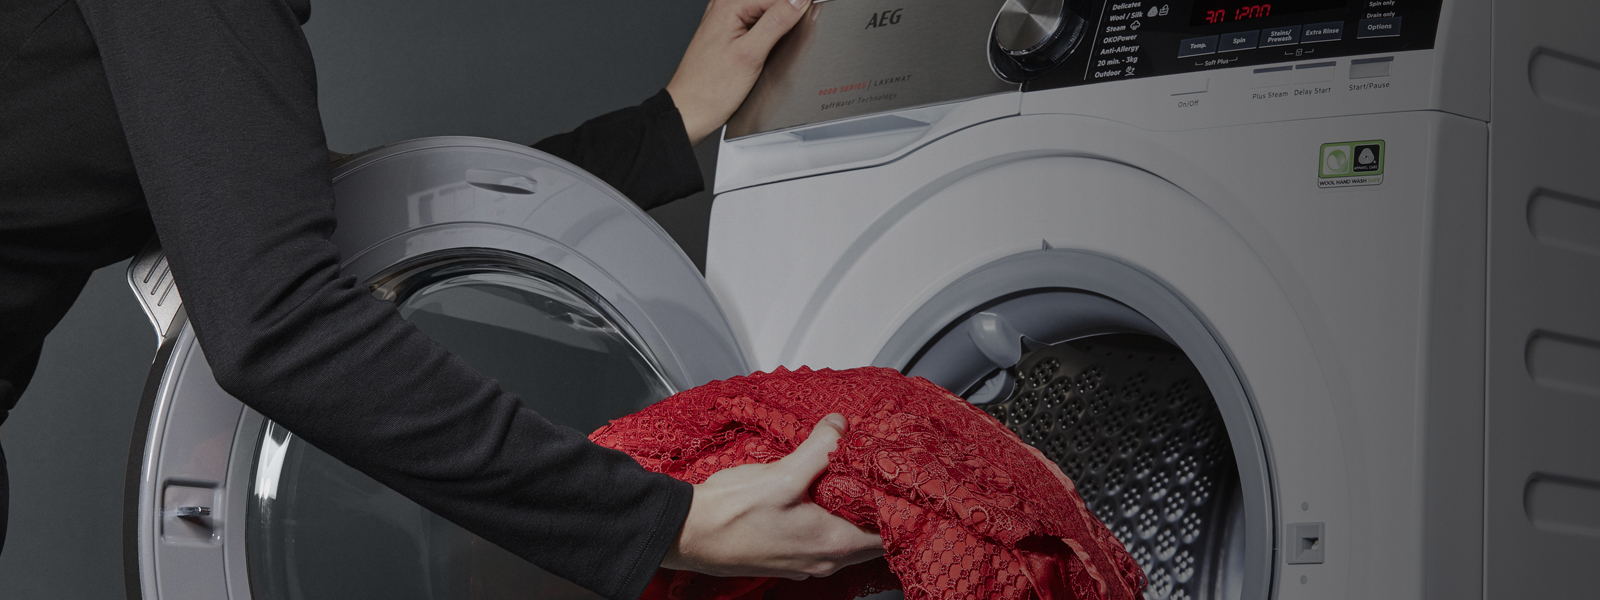 Save on selected AEG Laundry Appliances at Hart & Co